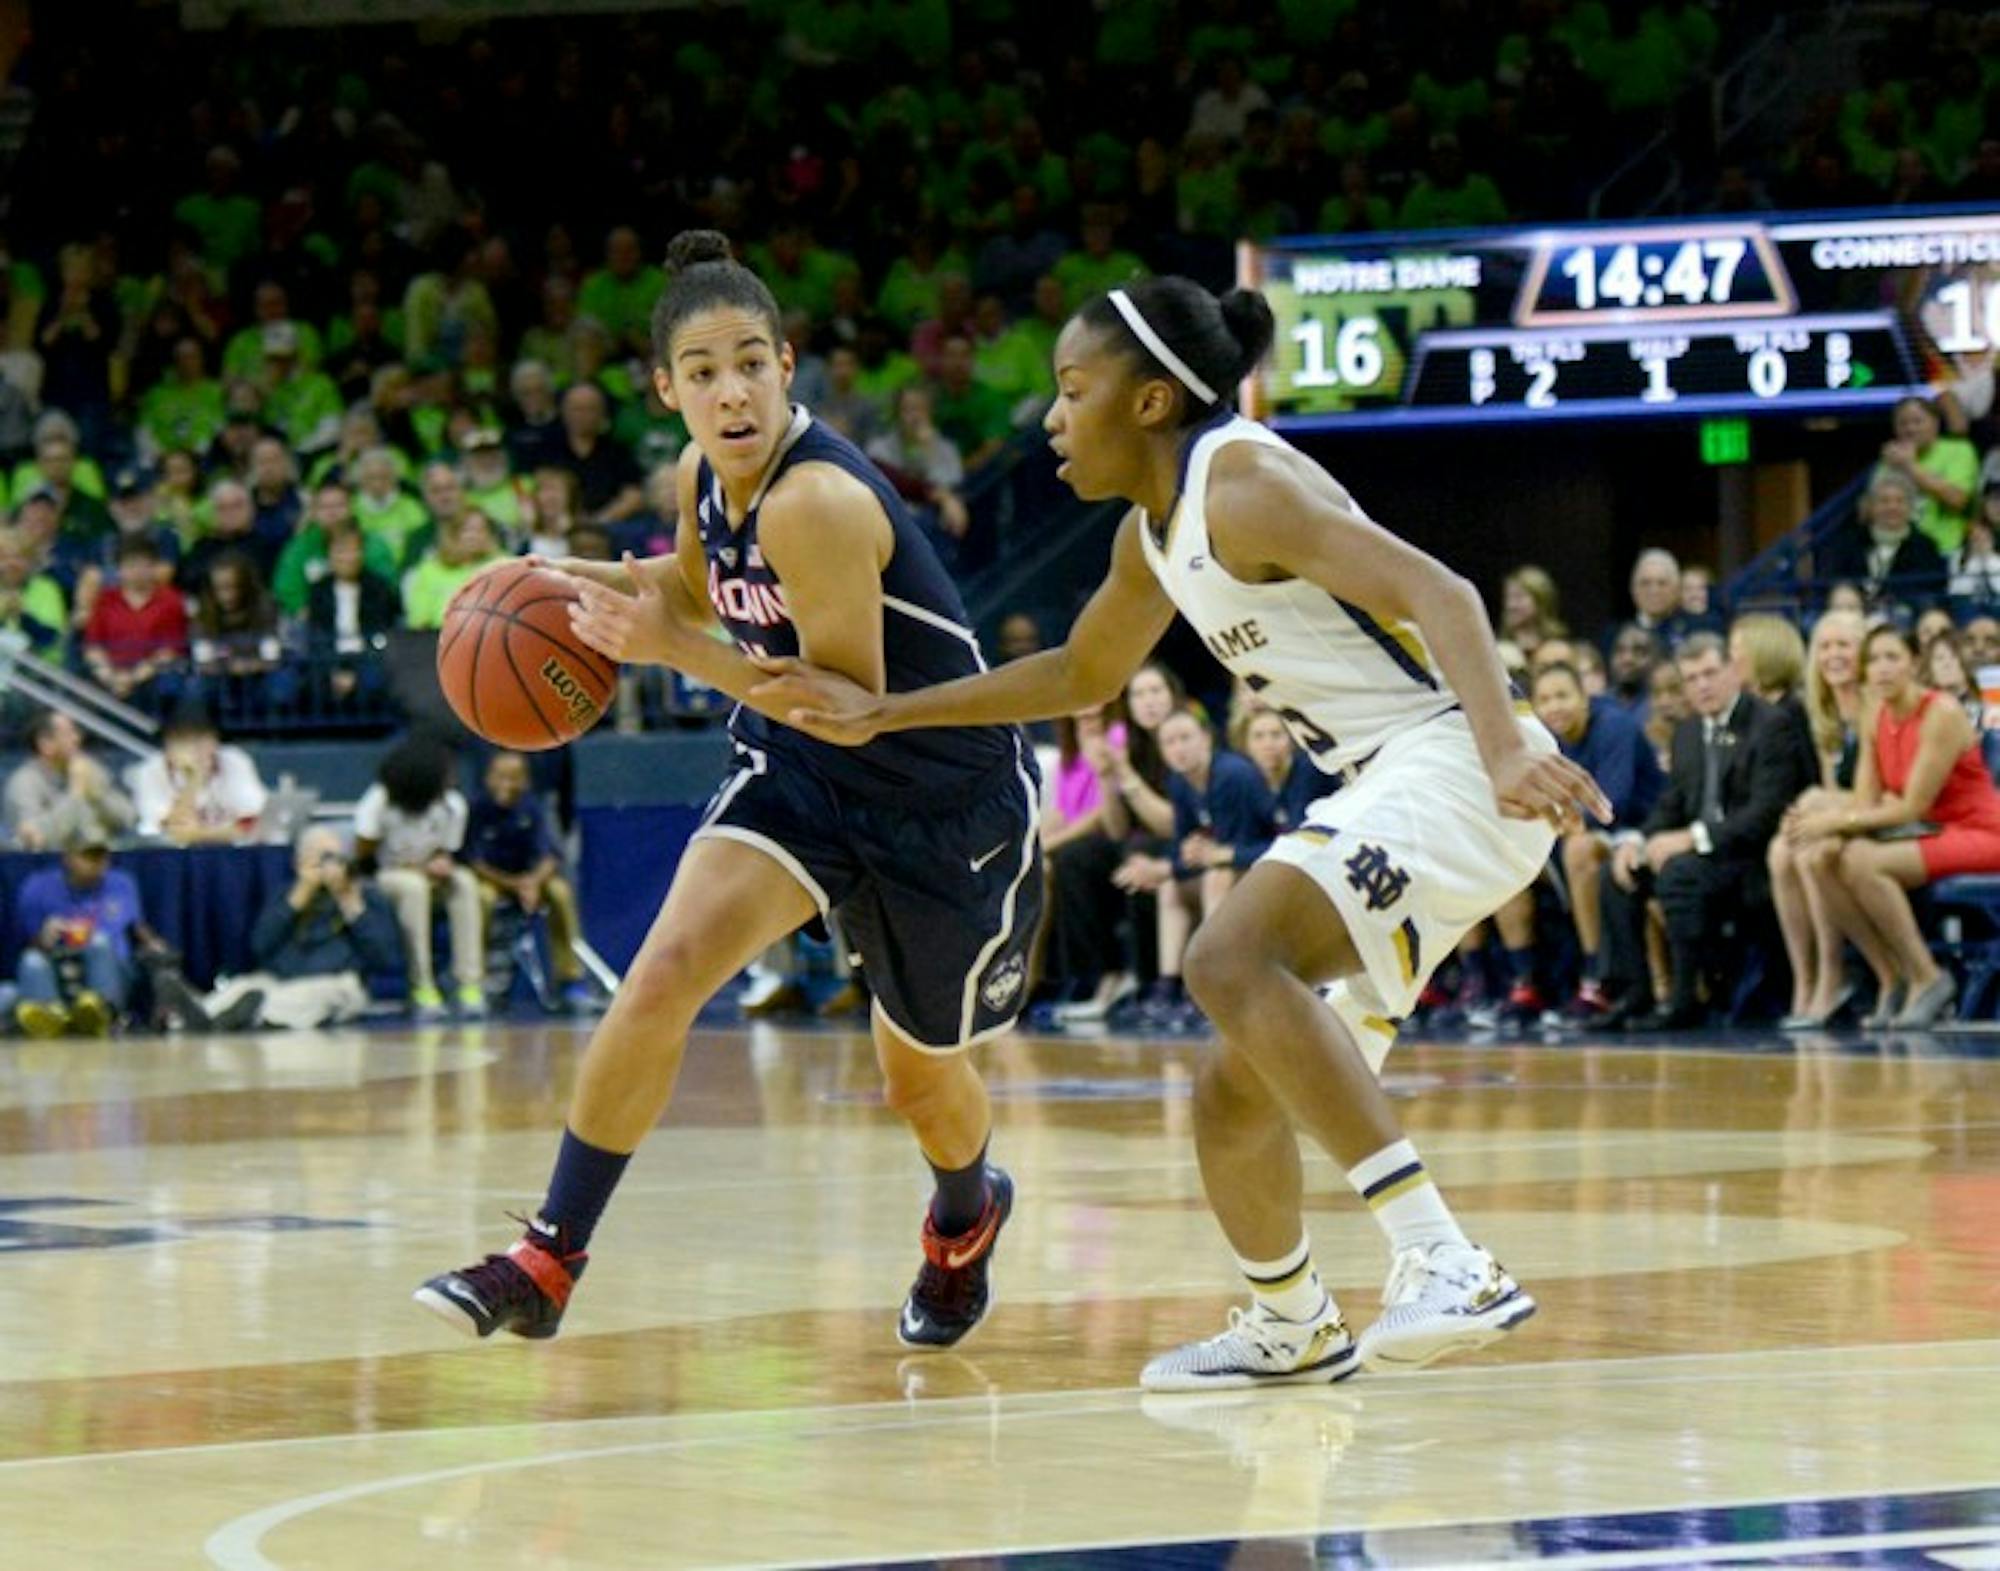 Irish sophomore guard Lindsay Allen plays tight defense during Notre Dame’s 76-58 loss to  Connecticut on Dec. 6 at Purcell Pavilion.